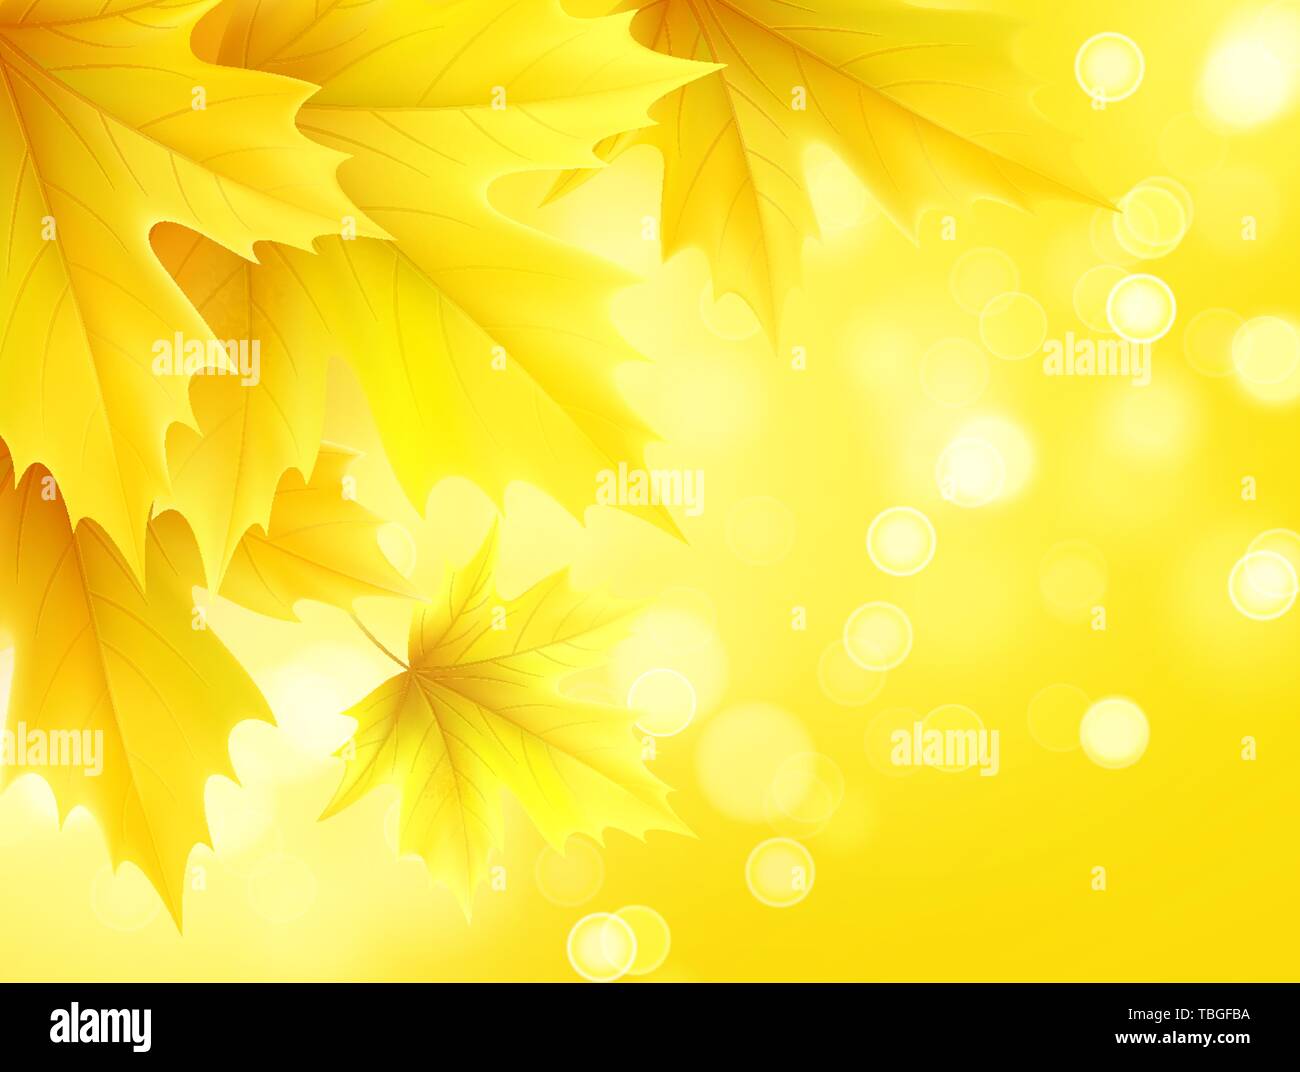 Autumn poster with yellow autumn maple leaves. Vector illustration Stock Vector